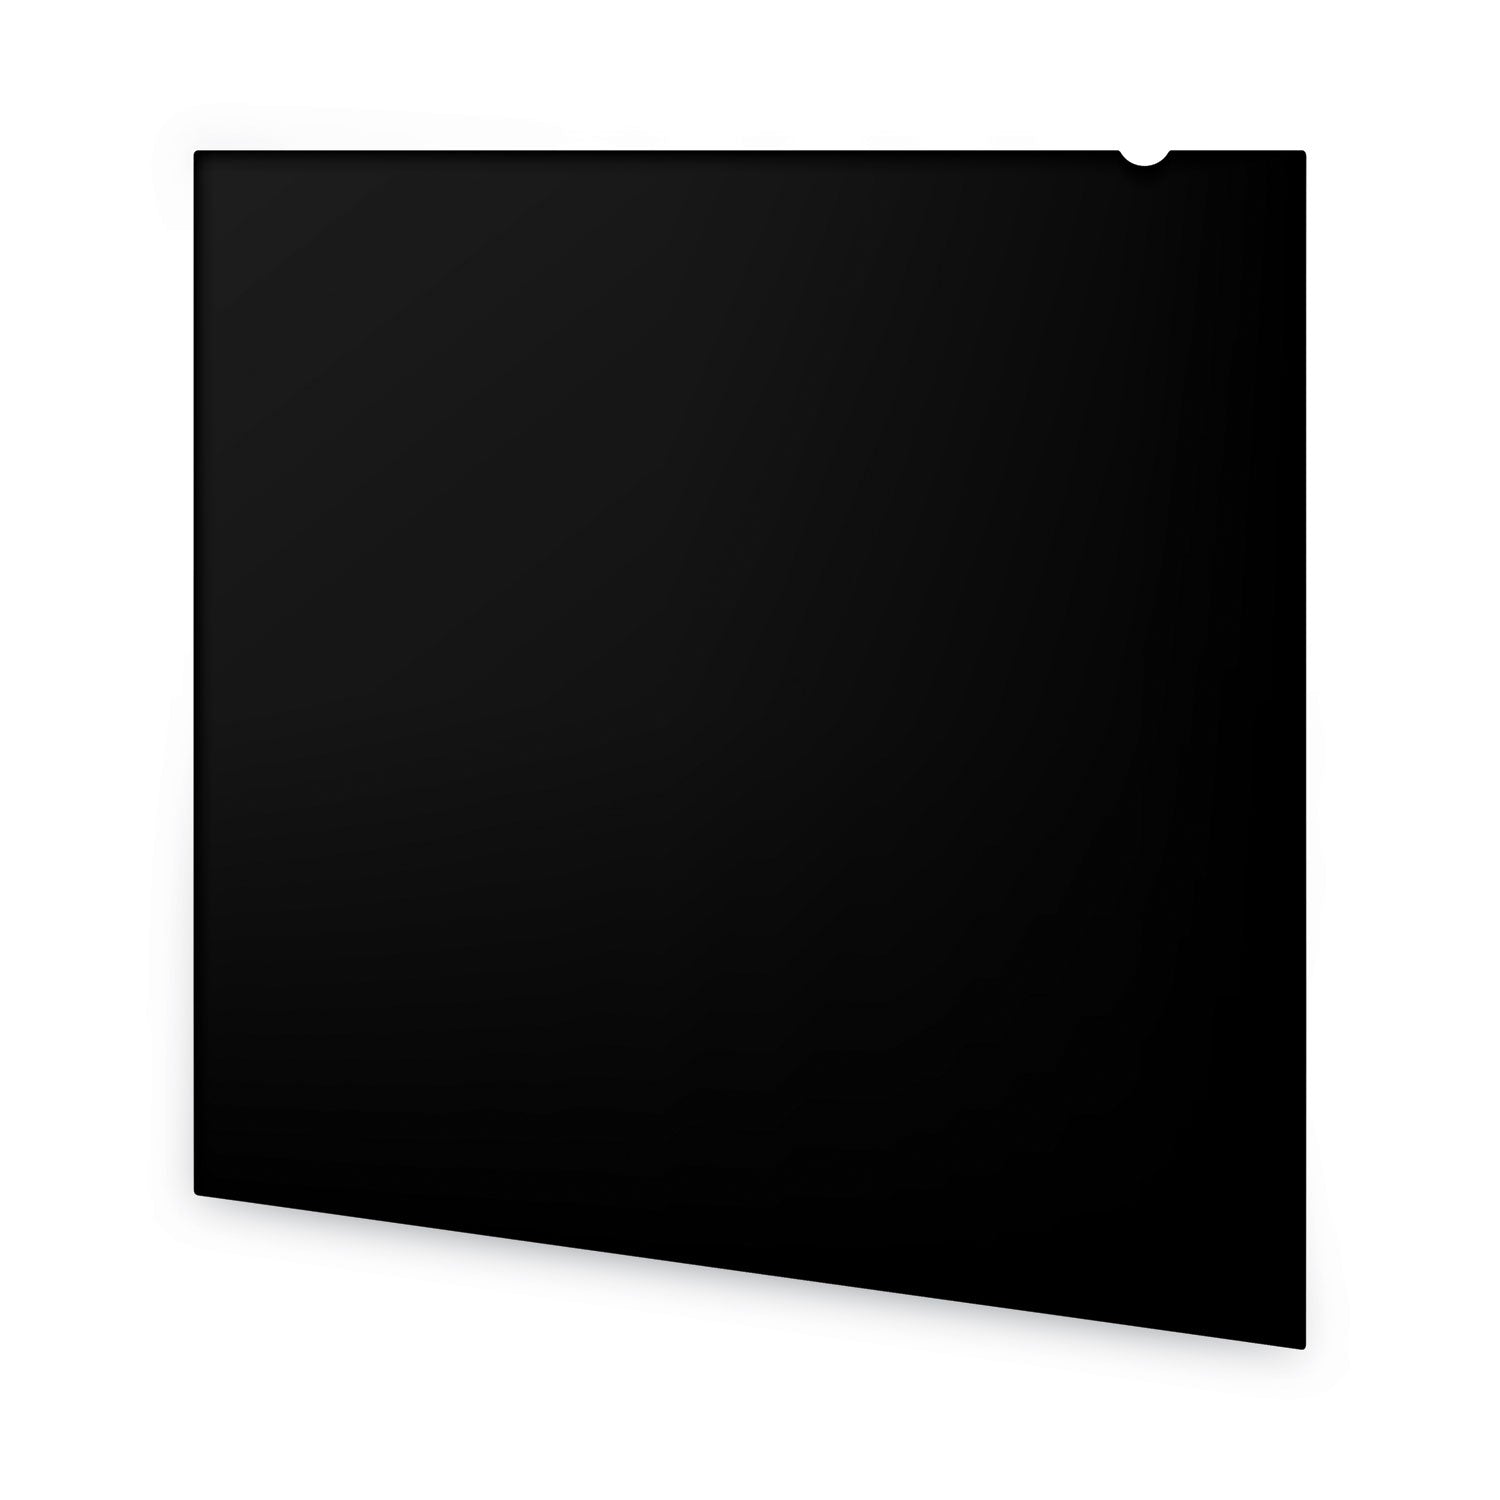 Blackout Privacy Filter for 24" Widescreen Flat Panel Monitor, 16:10 Aspect Ratio - 